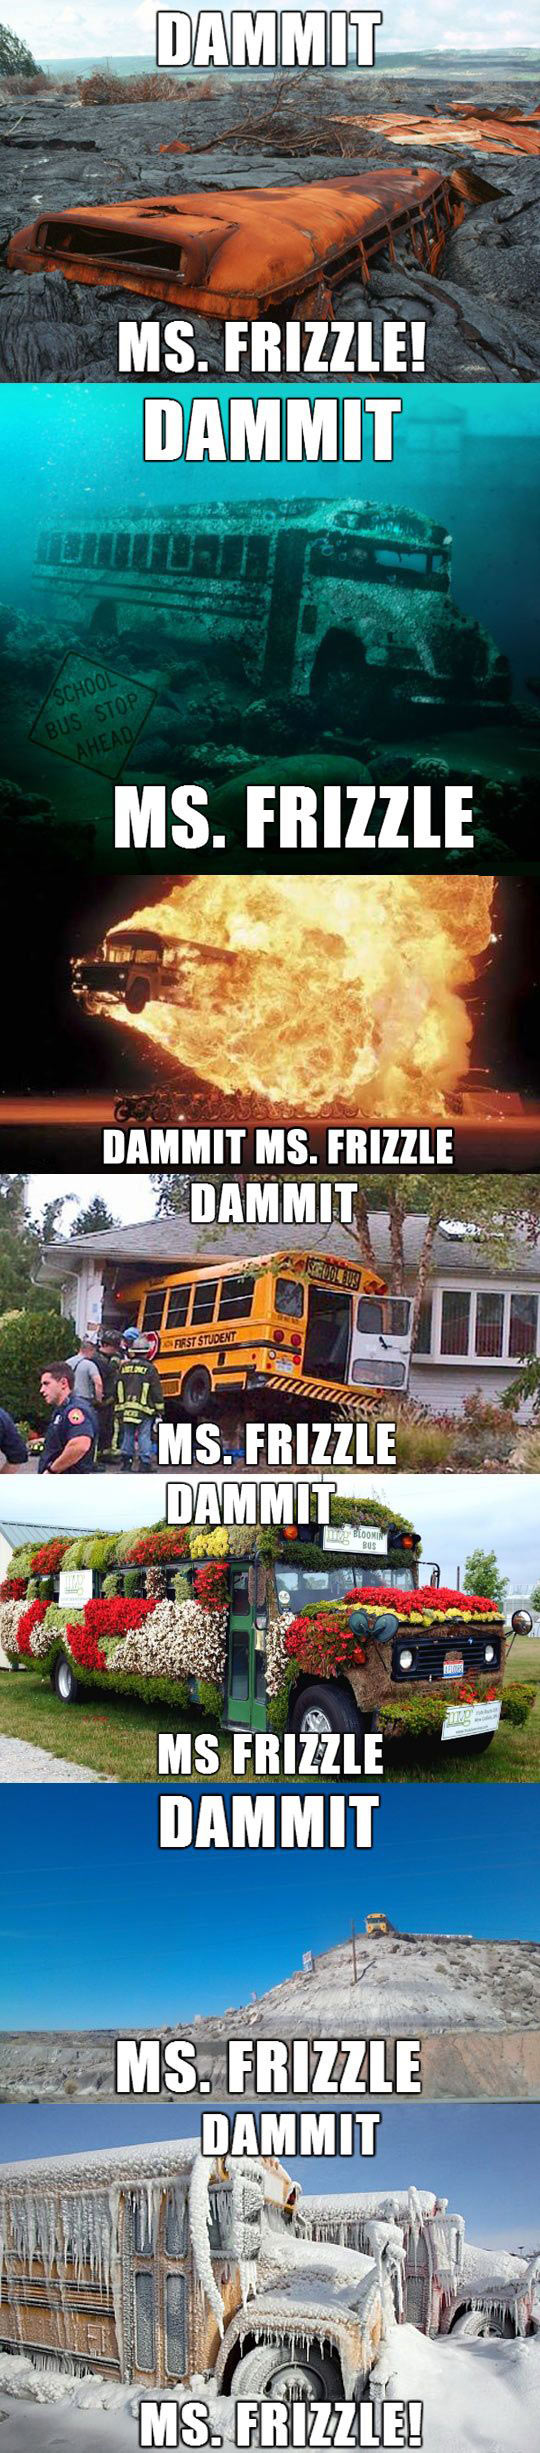 We trusted you, Mrs Frizzle